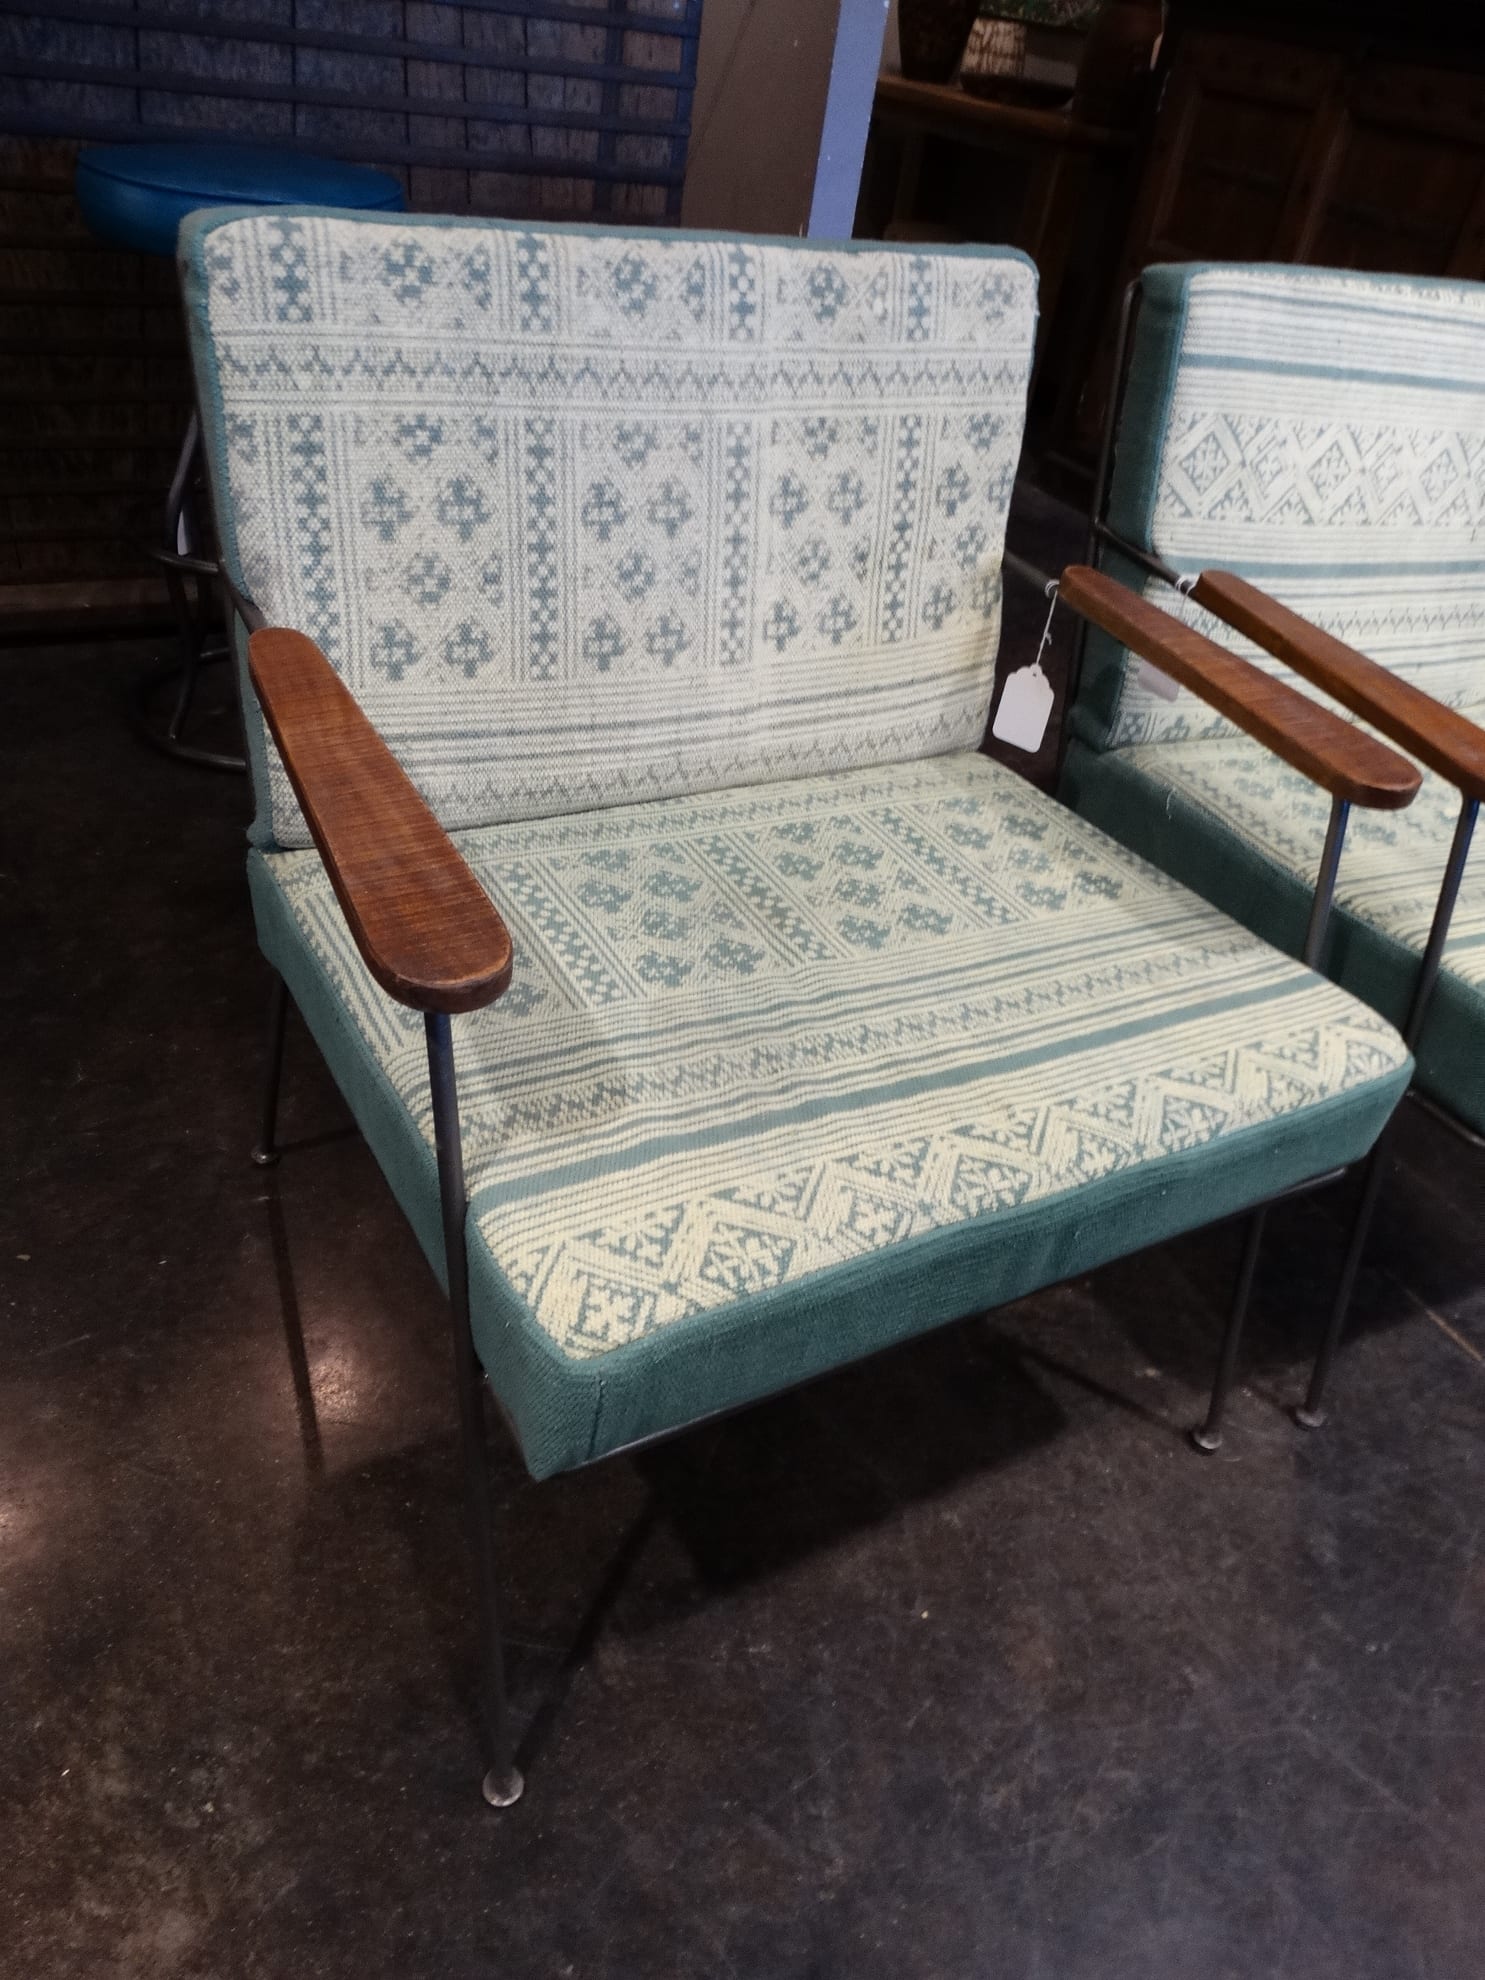 Upholstered Side Chairs With Arms